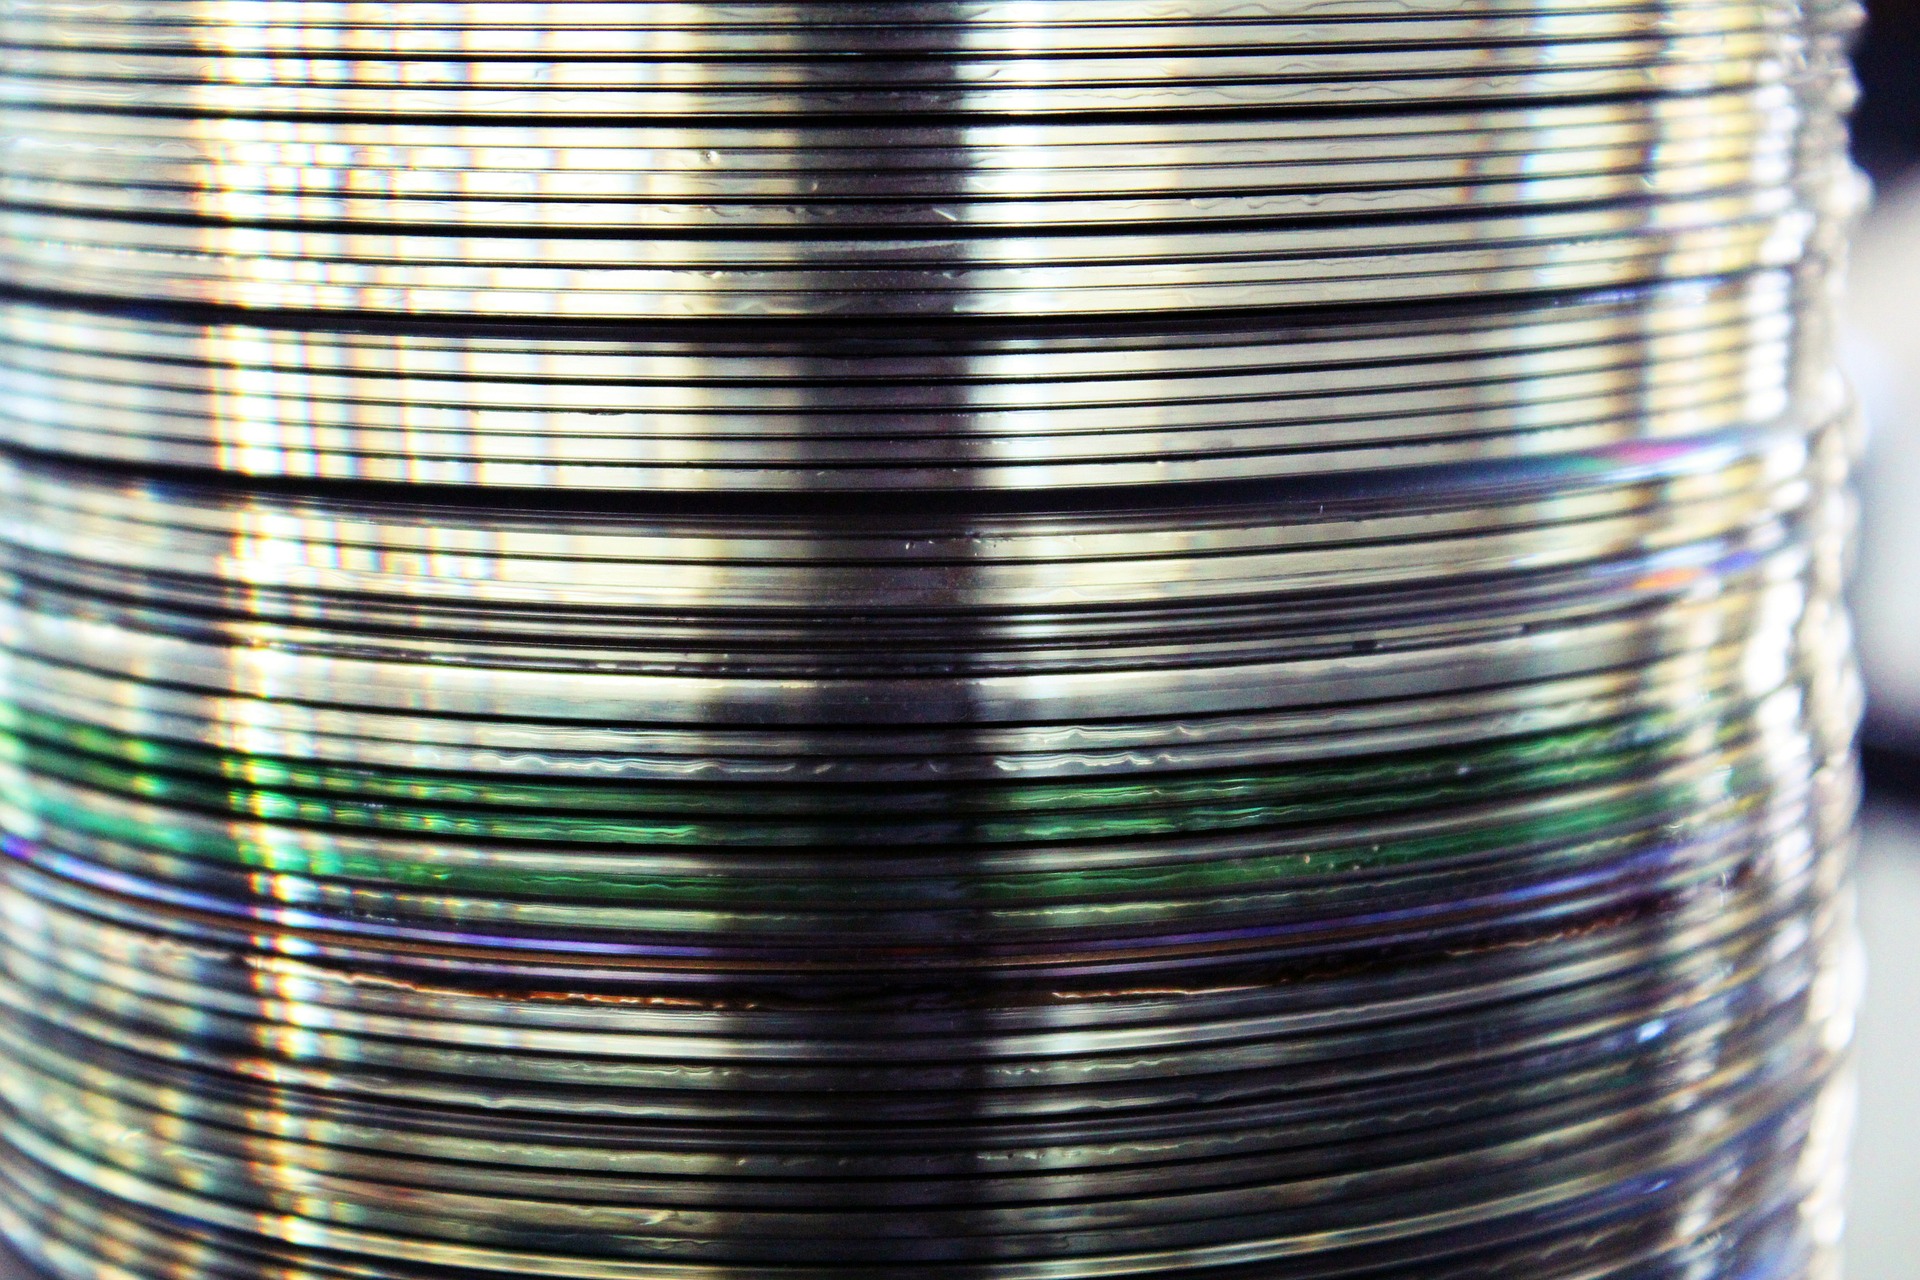 Stack of CDs